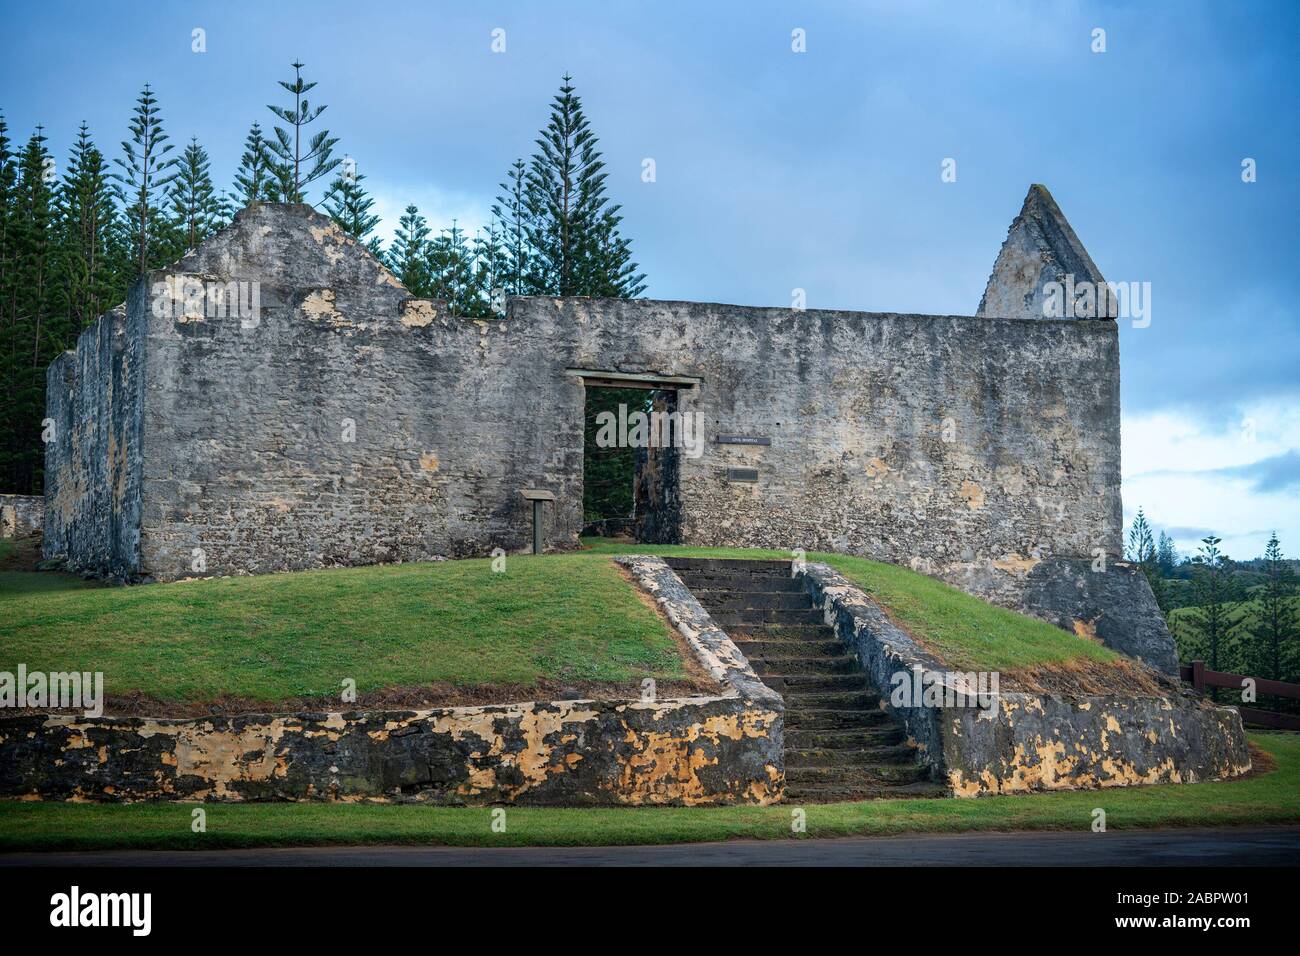 Ruins of the Convict or Civil Hospital built in 1829 in the Kingston and Arthur’s Vale Historic Area. Norfolk Island, Australia Stock Photo